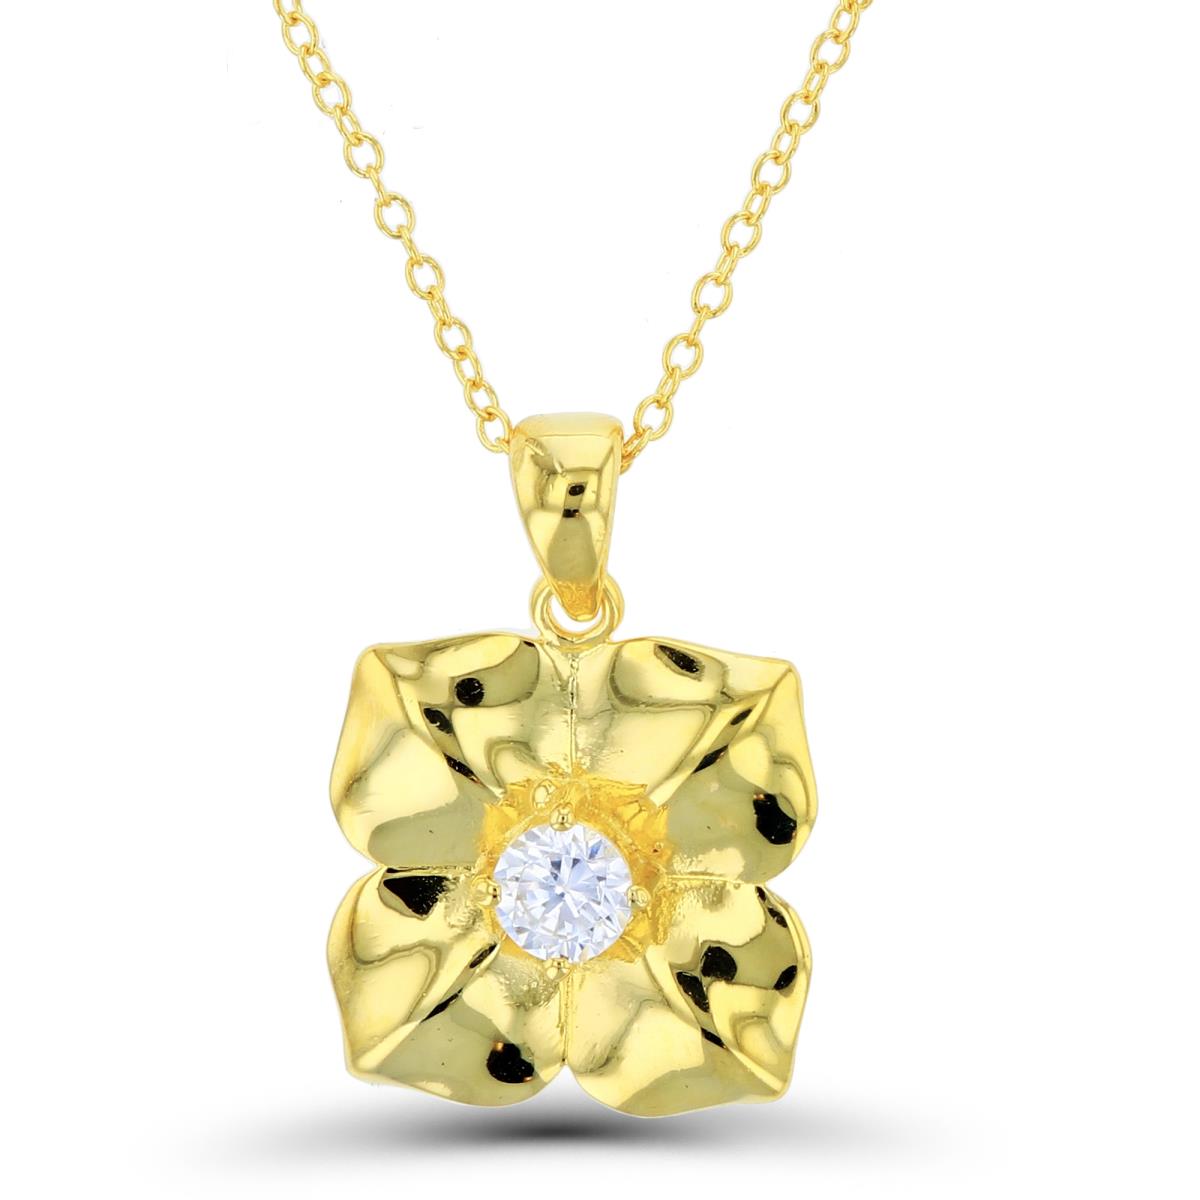 Sterling Silver+1Micron Yellow Gold 4.25mm Rnd White CZ High Polish DC Flower 16+2"Necklace